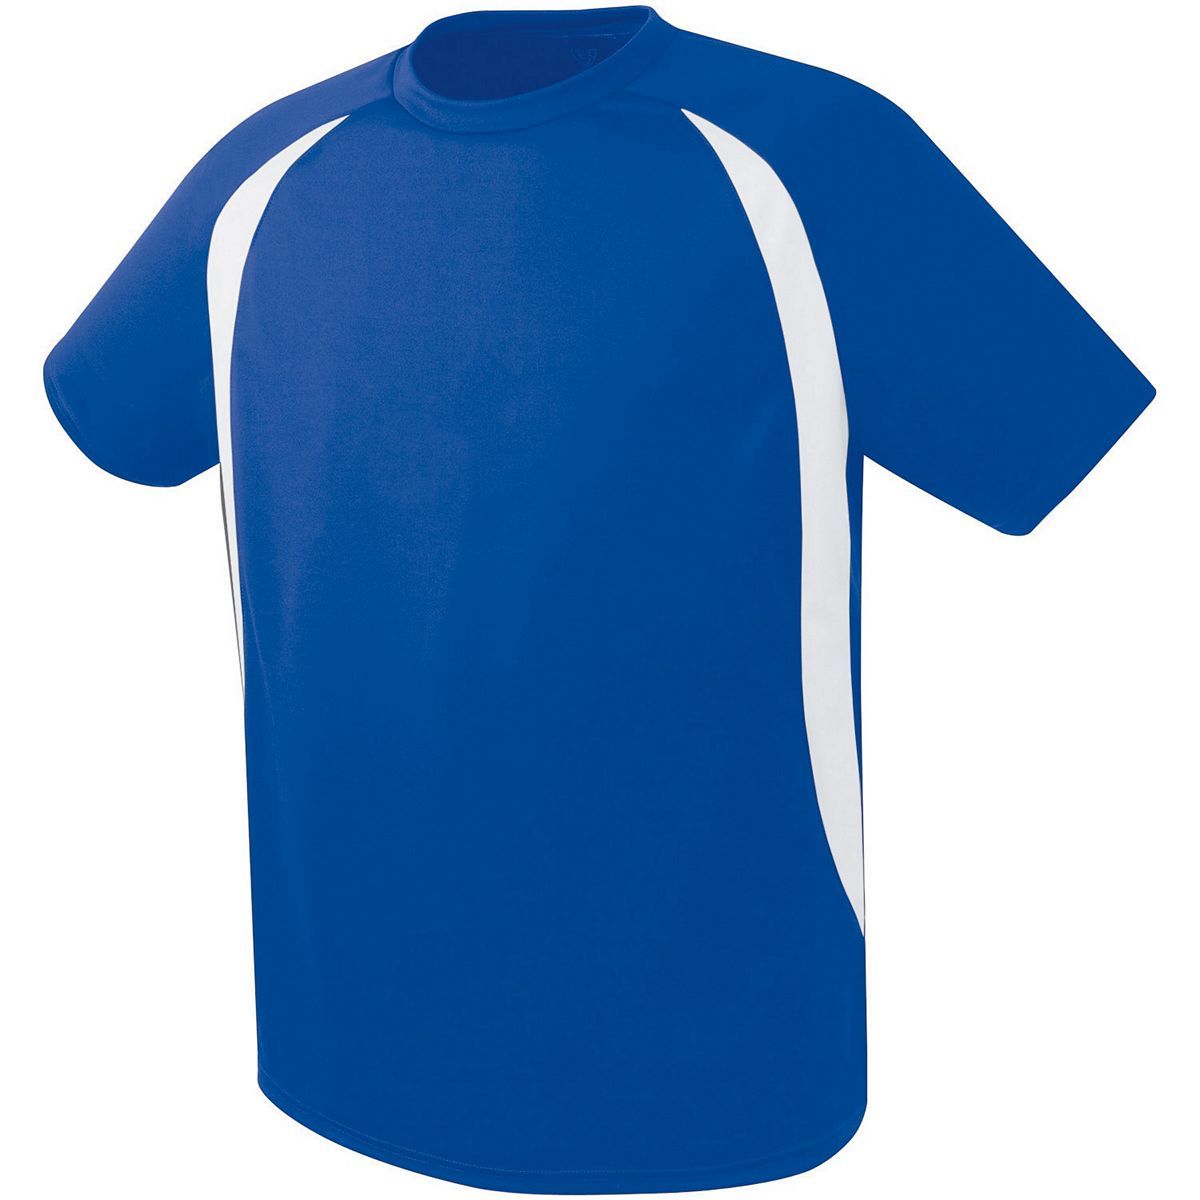 High 5 Youth Liberty Soccer Jersey in Royal/White  -Part of the Youth, Youth-Jersey, High5-Products, Soccer, Shirts, All-Sports-1 product lines at KanaleyCreations.com